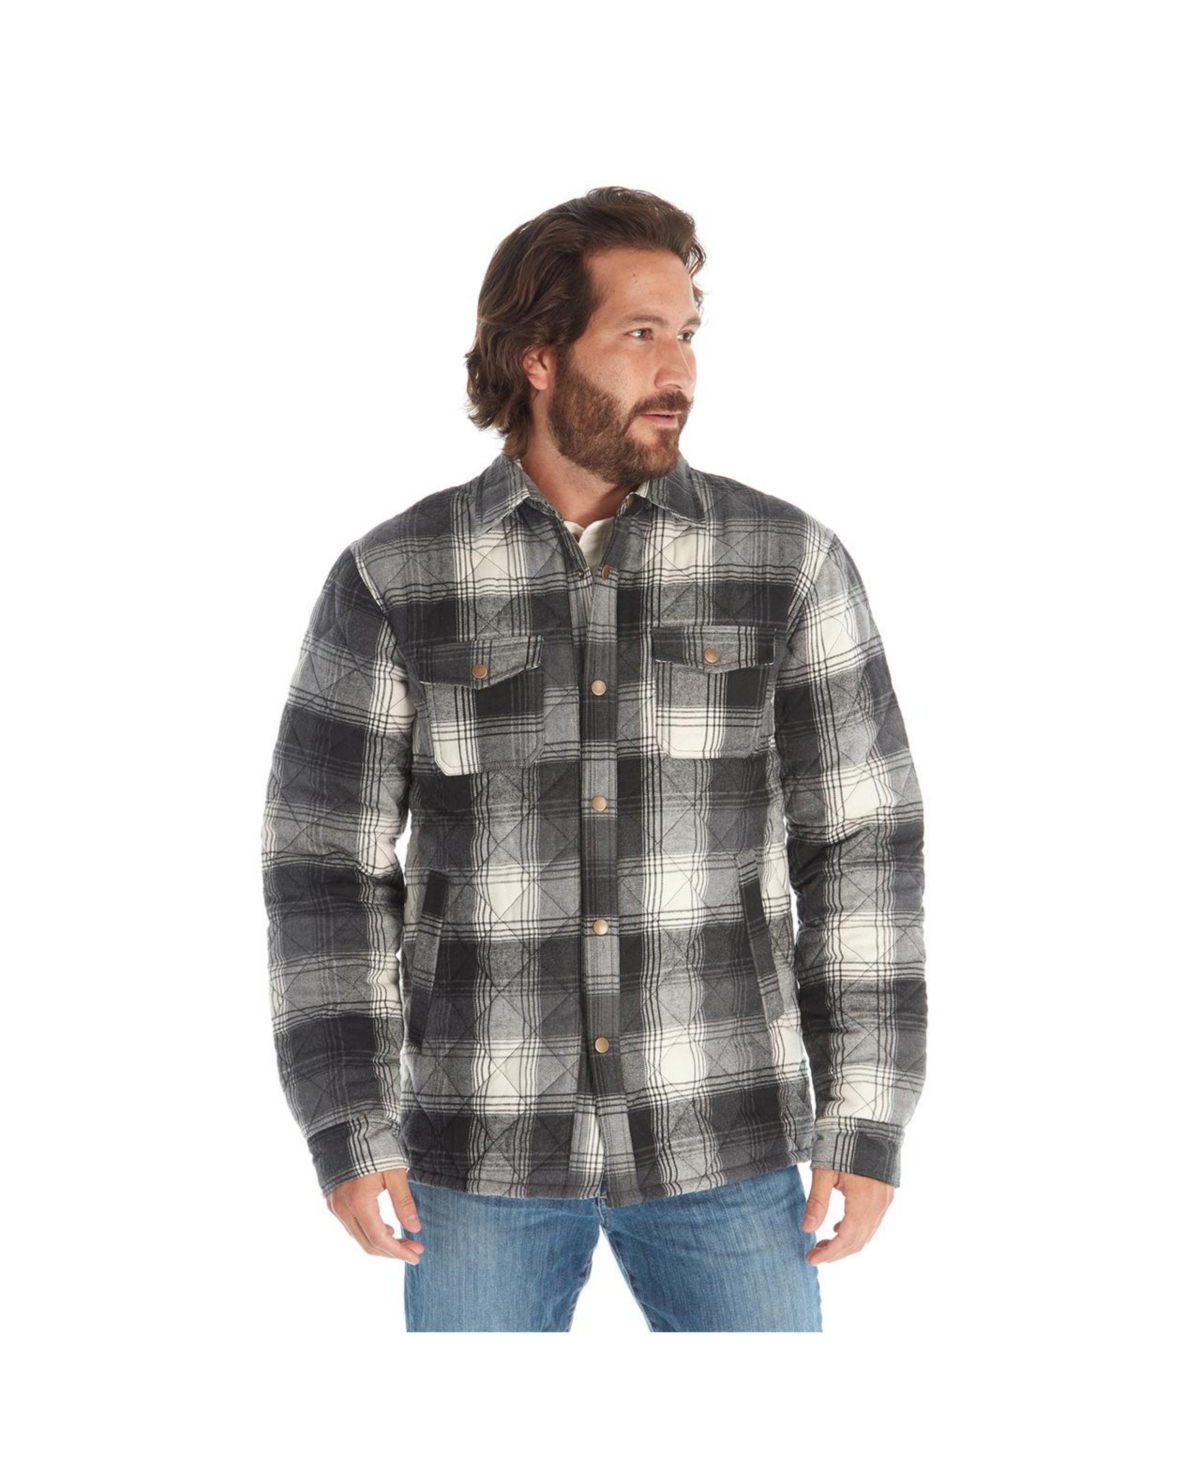 PX CLOTHING MEN'S HEAVY QUILTED PLAID SHIRT JACKET